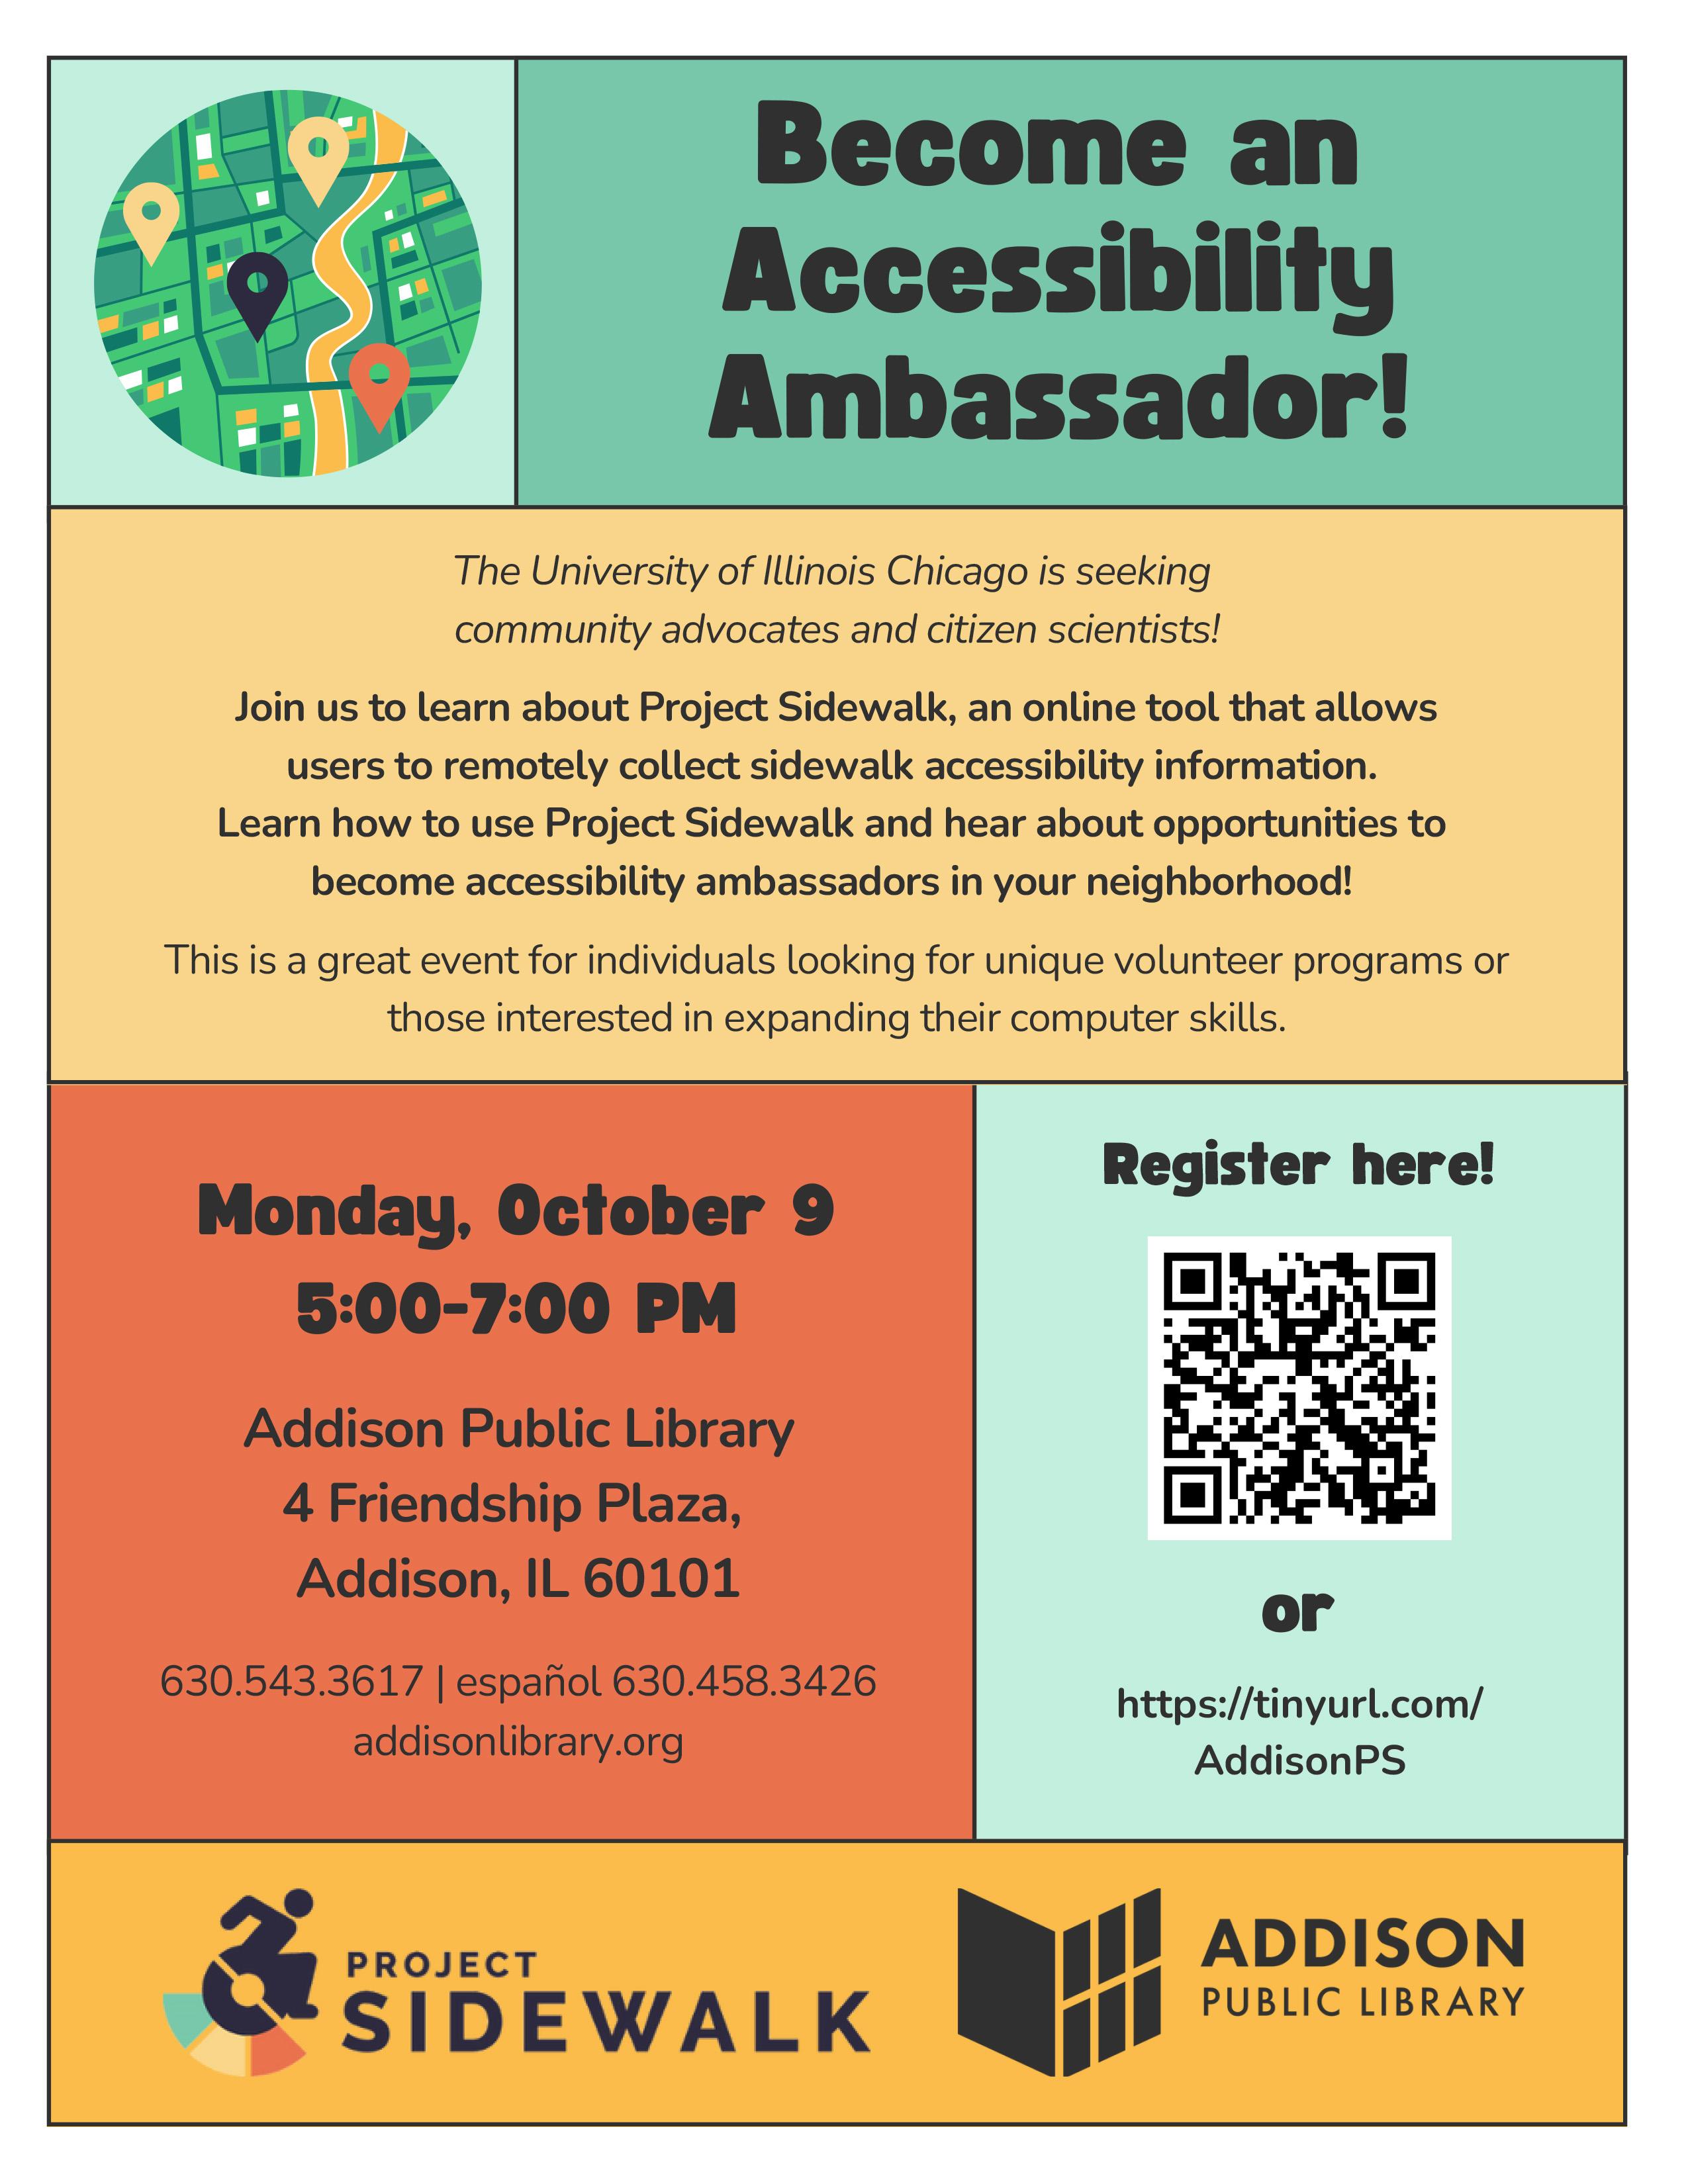 Eye on Education: Become an accessibility ambassador through Project Sidewalk